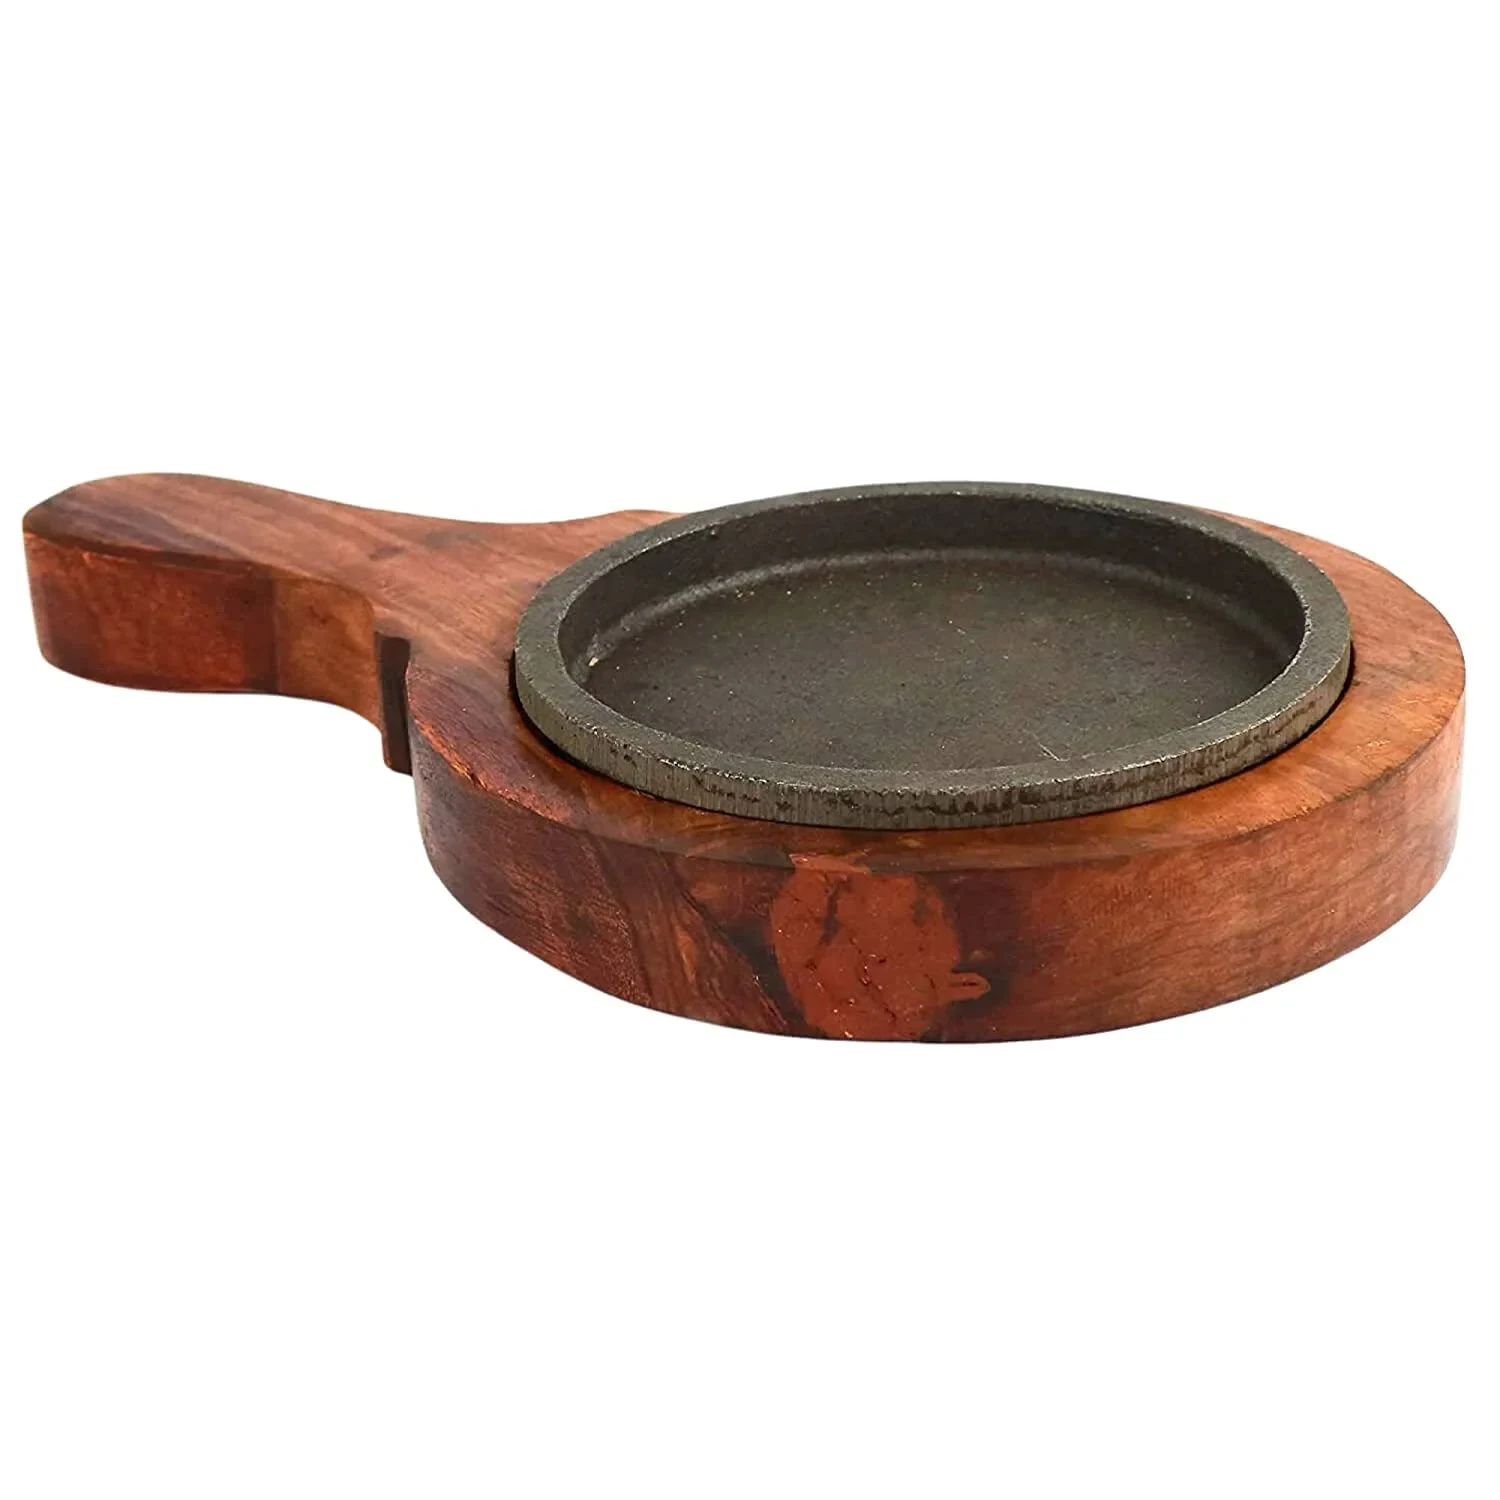 santarms Cast Iron Sizzler Plate with Wooden Stand